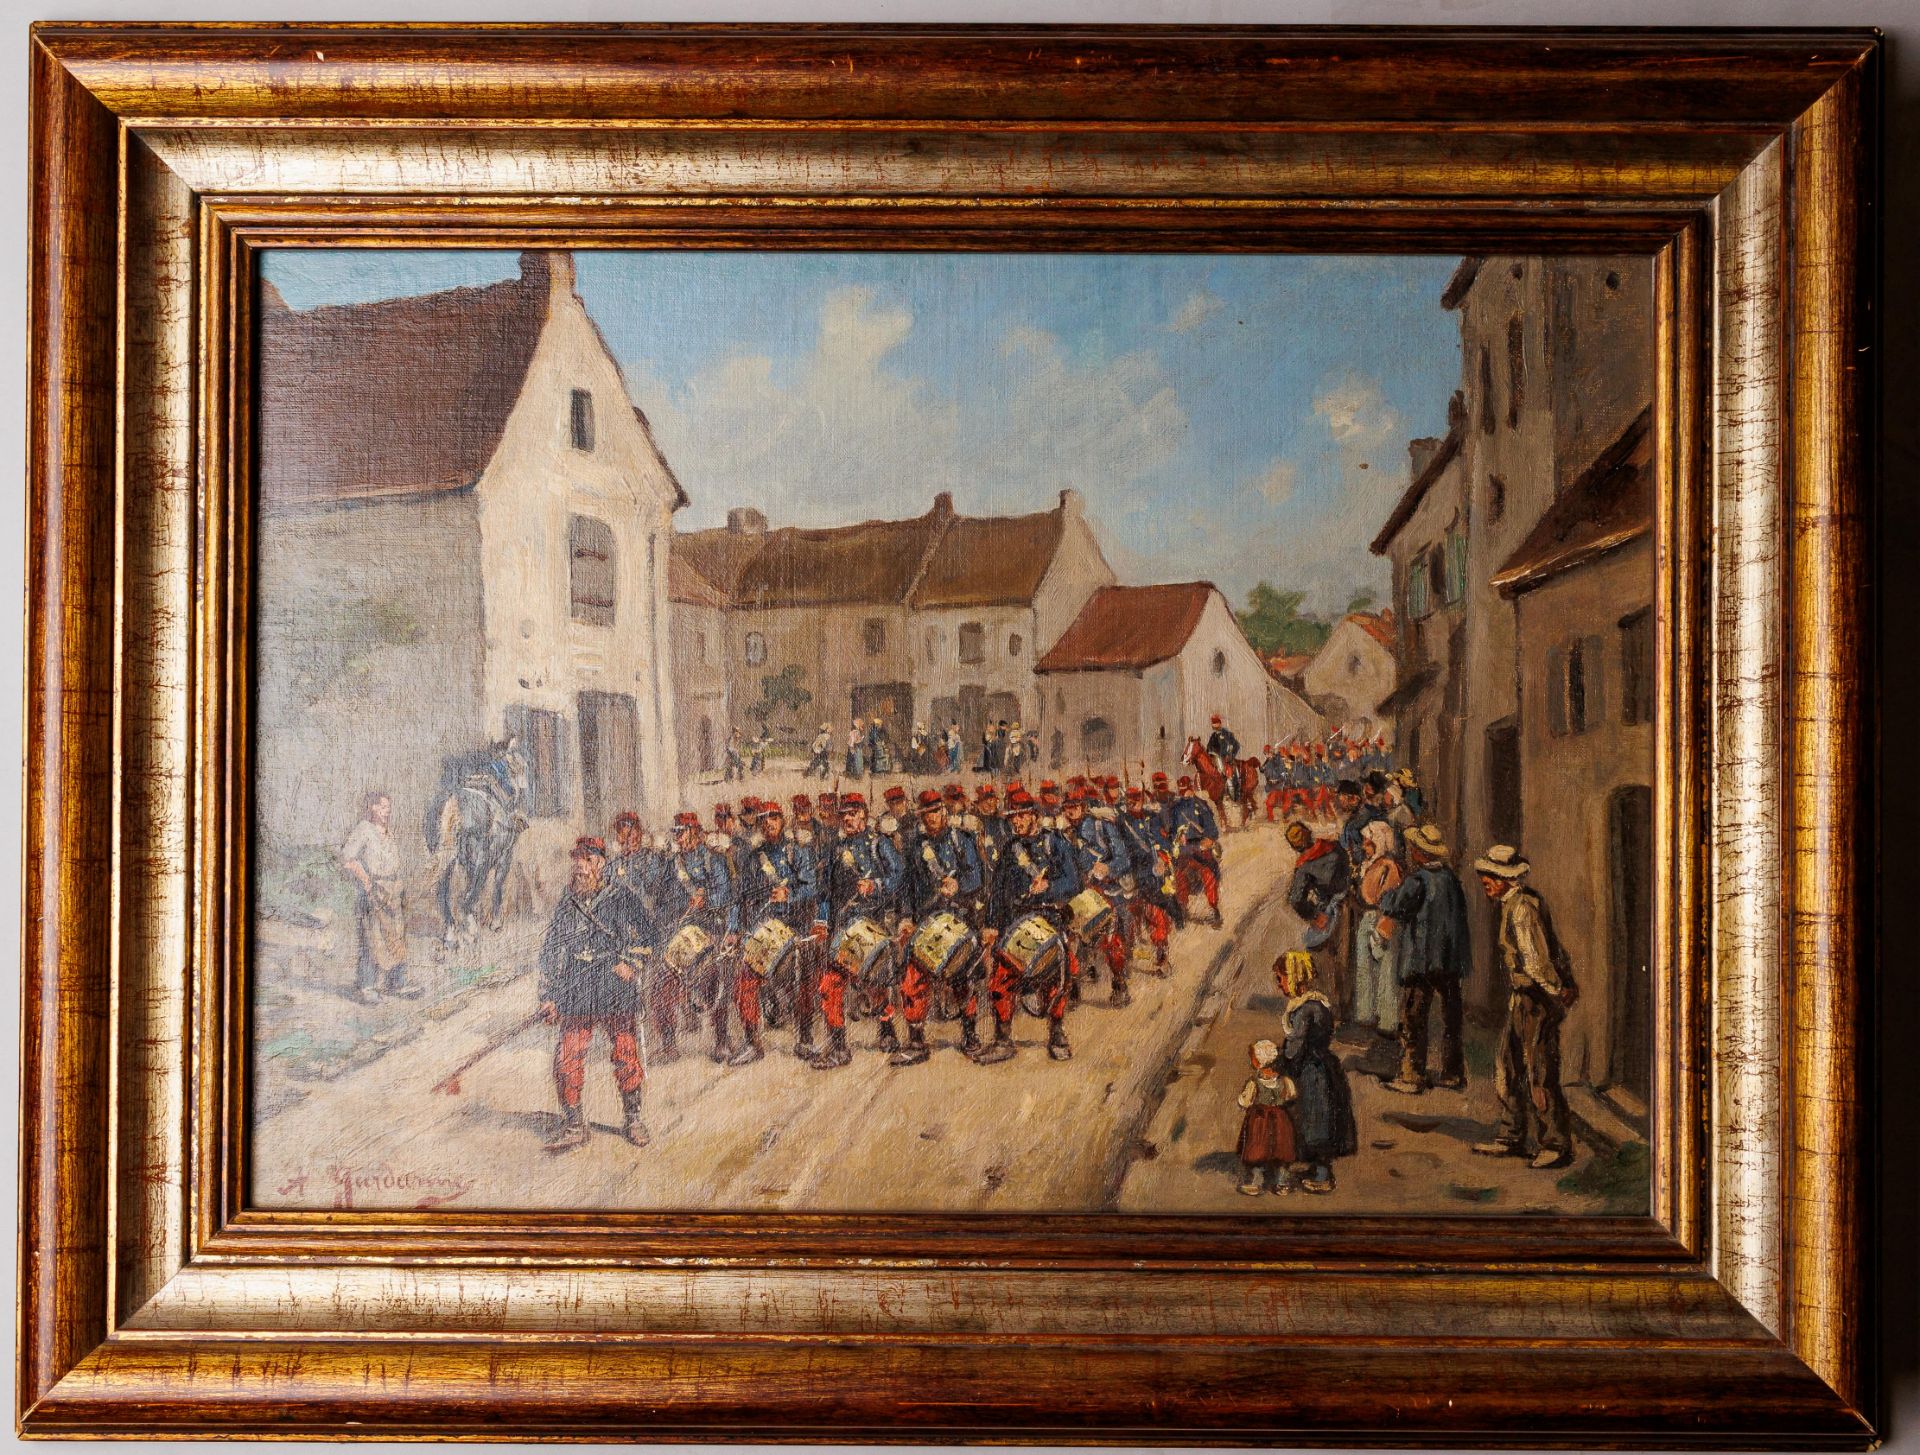 The paint in the frame "Soldiers are walking on the street"